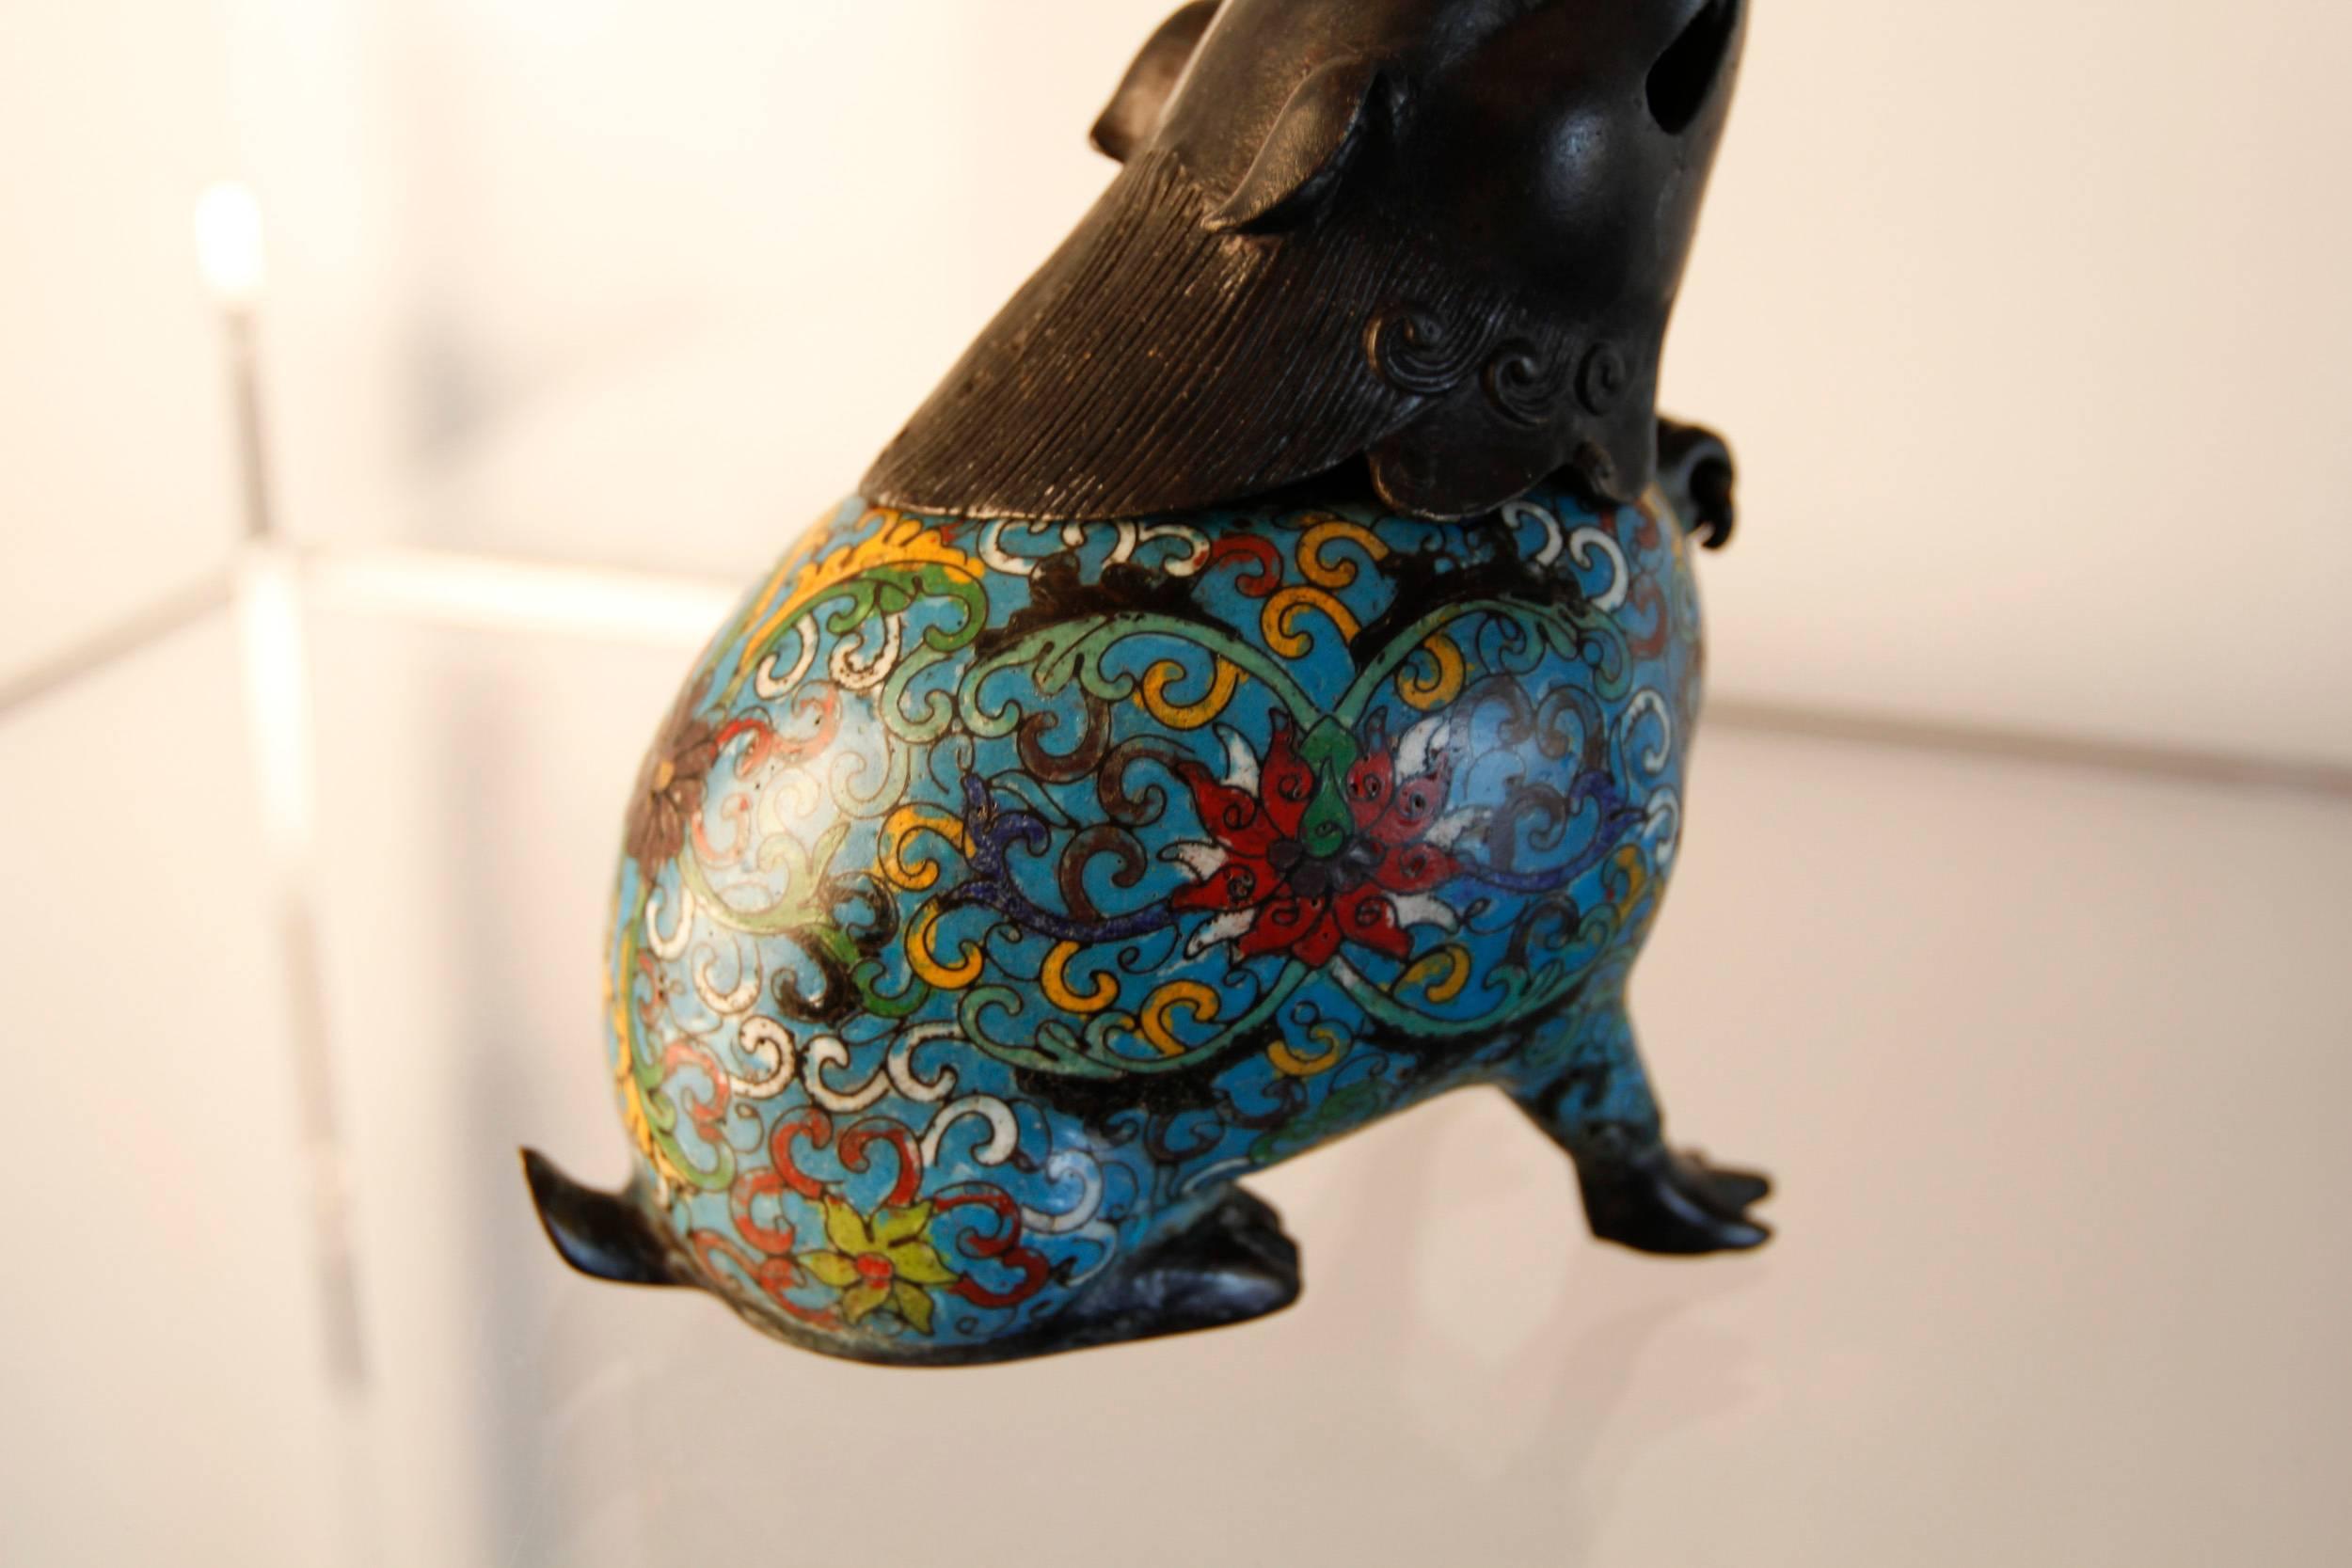 Cloissoné Mid-20th Century Chinese Bronze and Cloisonné Fu Dog Incense Burner For Sale